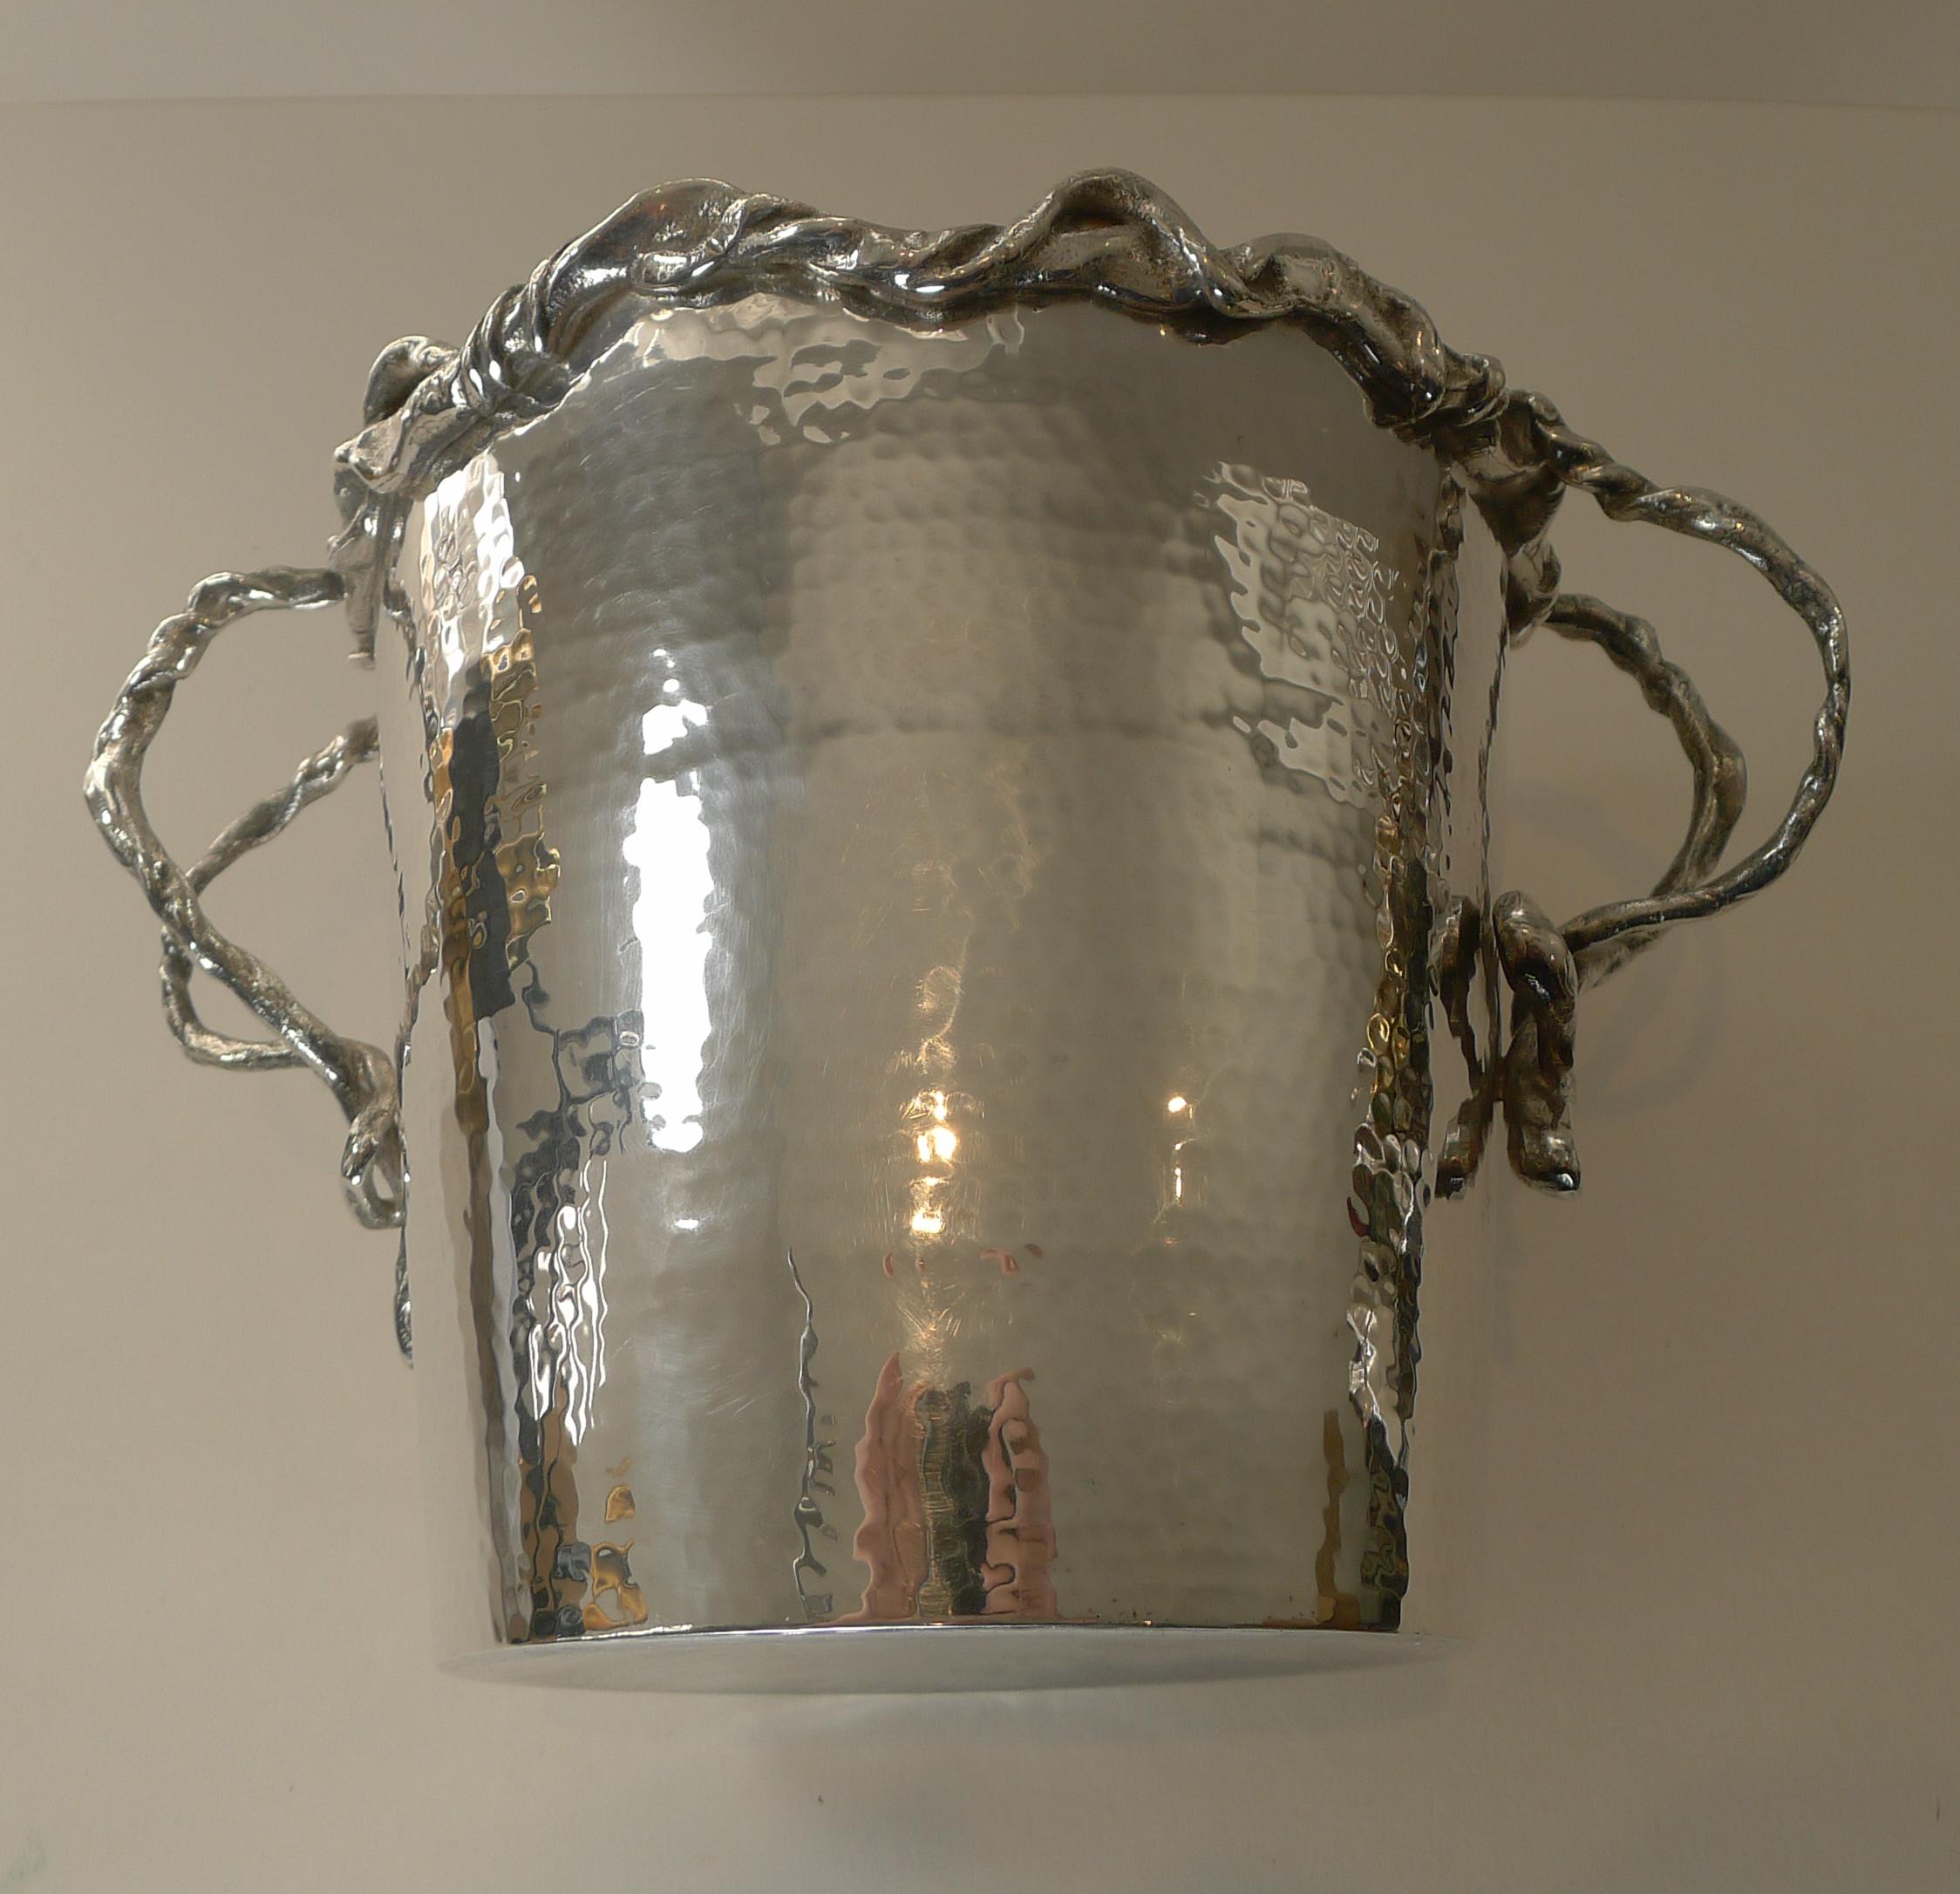 A truly stylish and really unusual champagne bucket or wine cooler made from silver plate, lovely quality and weight.

The underside is signed but I have not been able to identify the signature, Italian in origin, sourced in Italy.

The handles